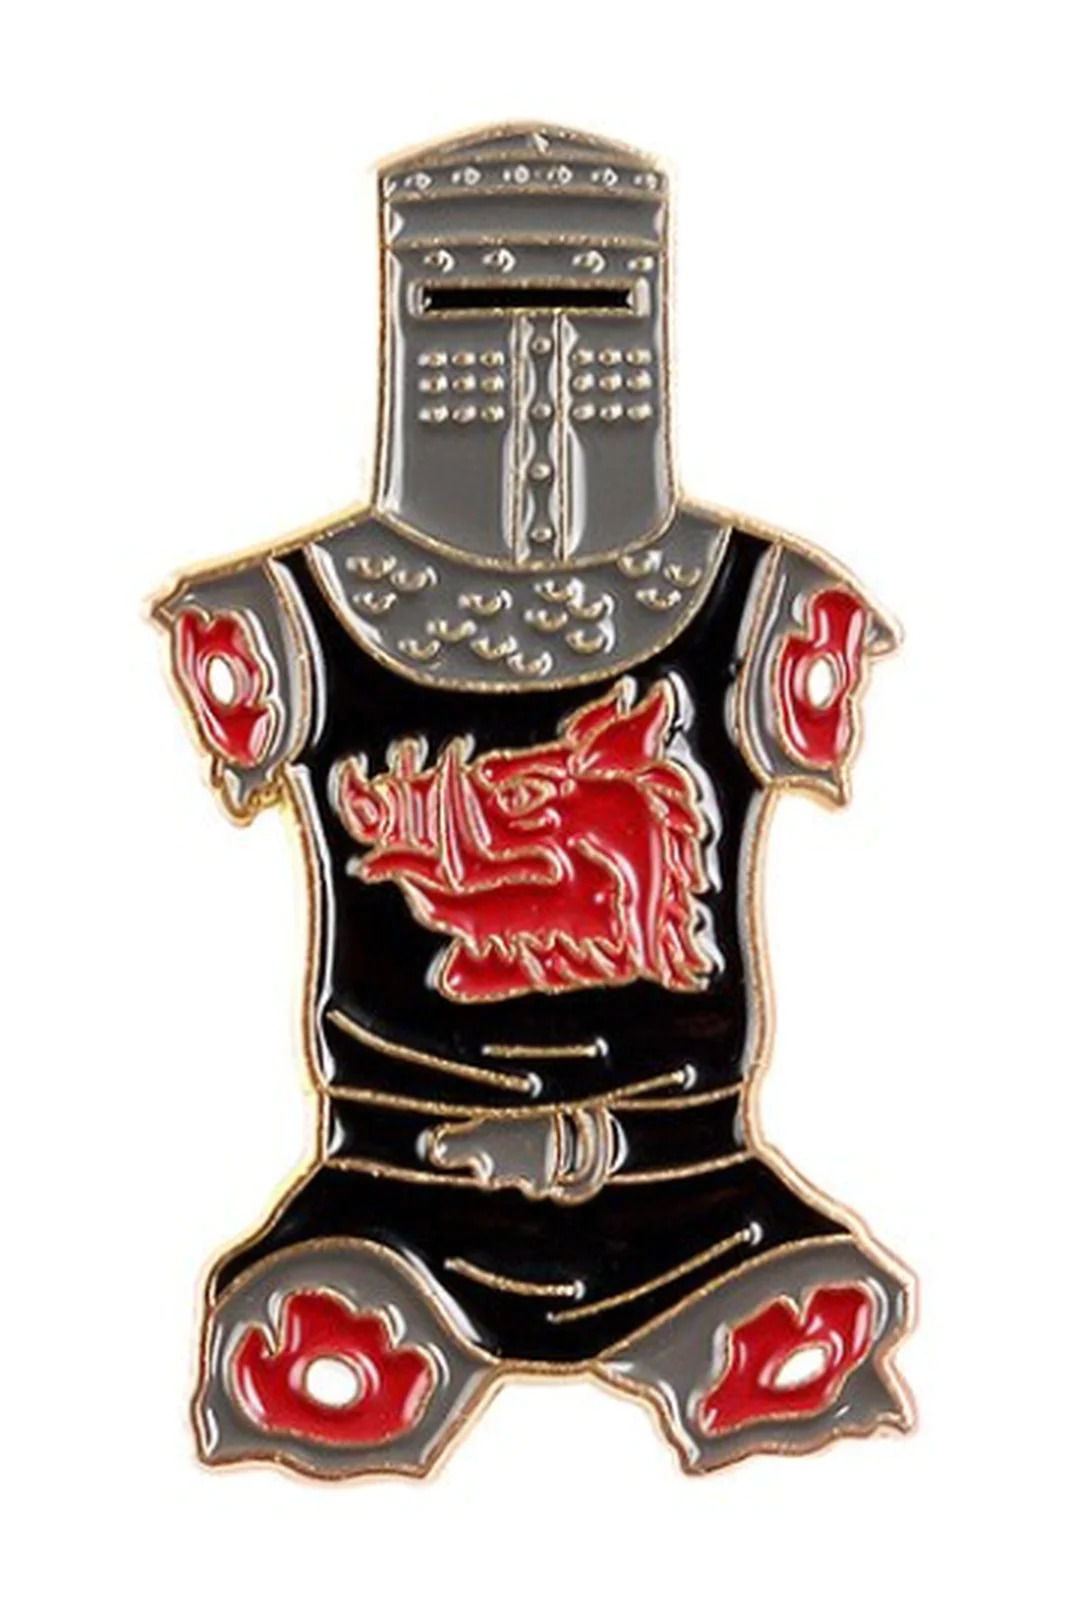 Monty Python Black Knight Pin Search For The Holy Grail Tis a flesh wound Gold V